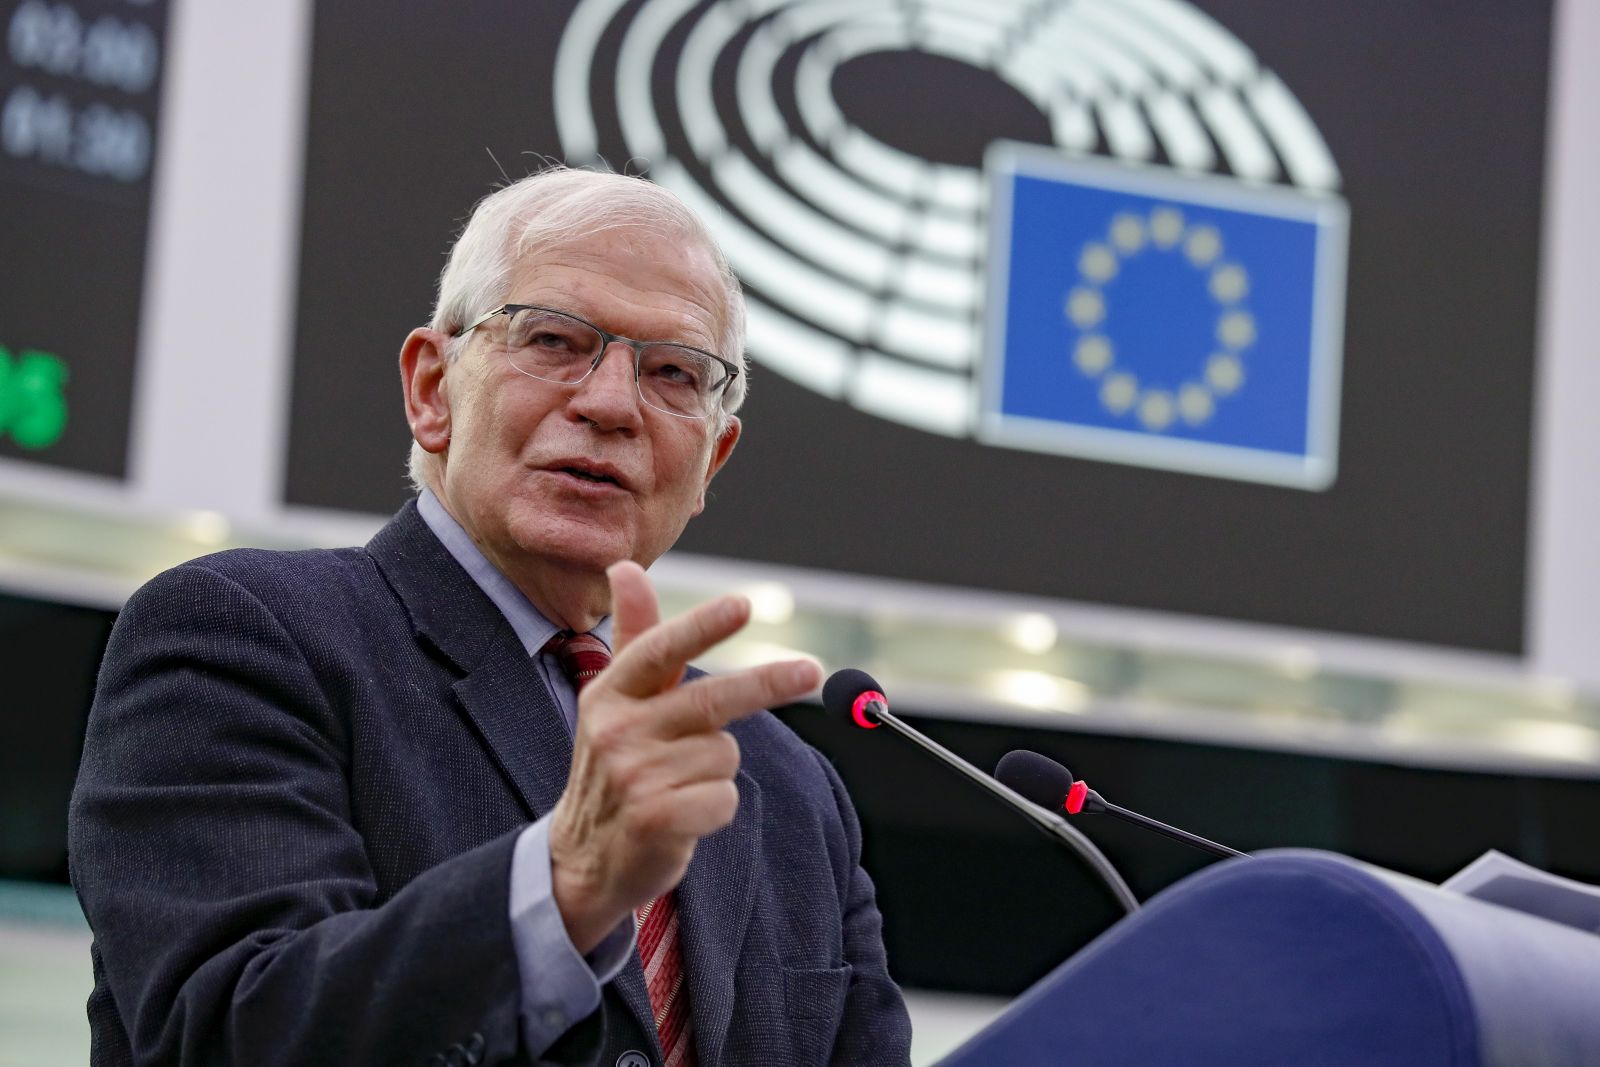 epa09812102 The high representative for the Foreign Affairs of the European Union Josep Borrell during a debate on the EU's role in a changing world and the security situation of Europe following the Russian aggression and invasion on Ukraine', at the European Parliament in Strasbourg, France, 09 March 2022. The session of the European Parliament runs from 07 till 10 March 2022.  EPA/JULIEN WARNAND